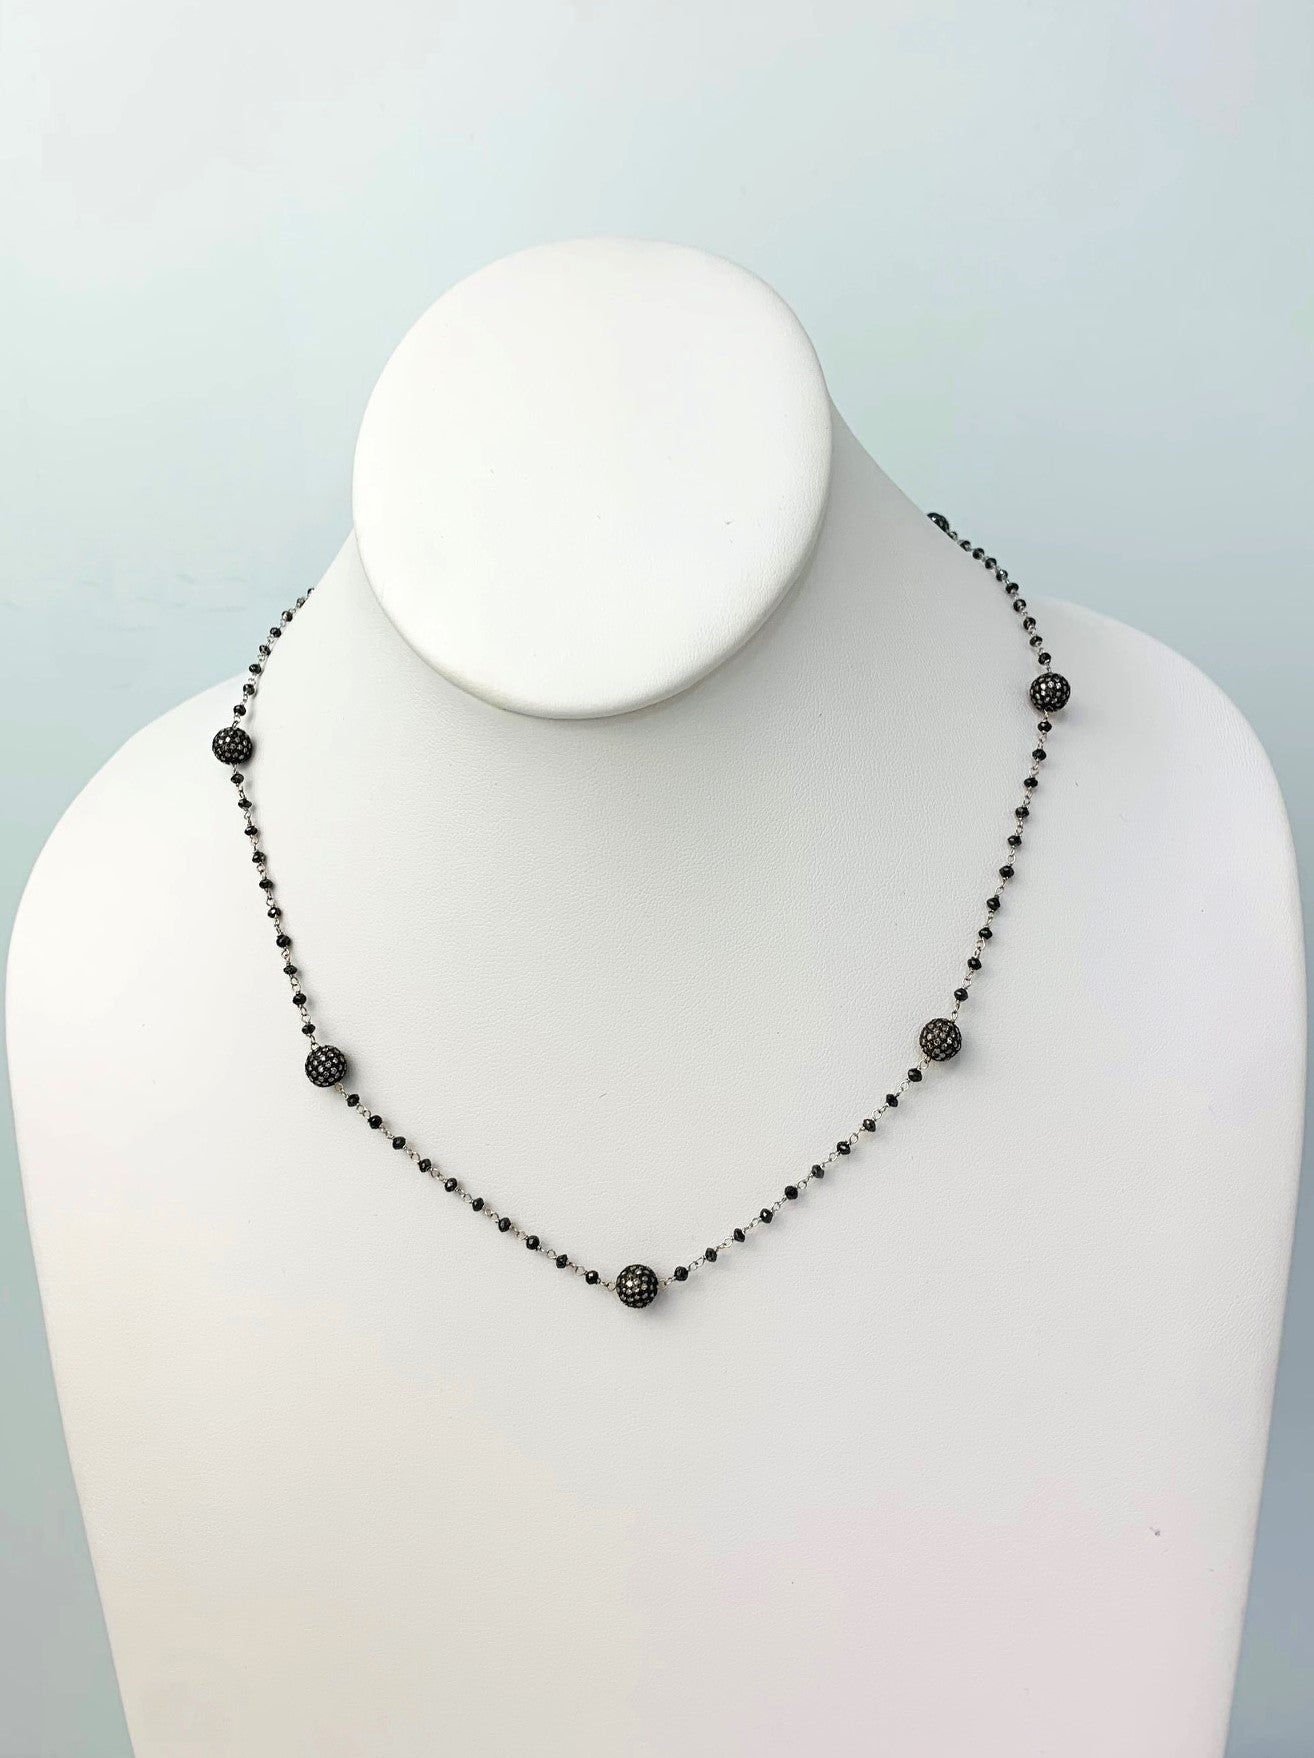 18" Black Diamond Rosary Necklace With Blackened Sterling Silver Pave Diamond Beads in 14KW, SS - NCK-385-DCOROSDIA14WSS-BLKGRY-18 10.6ctw